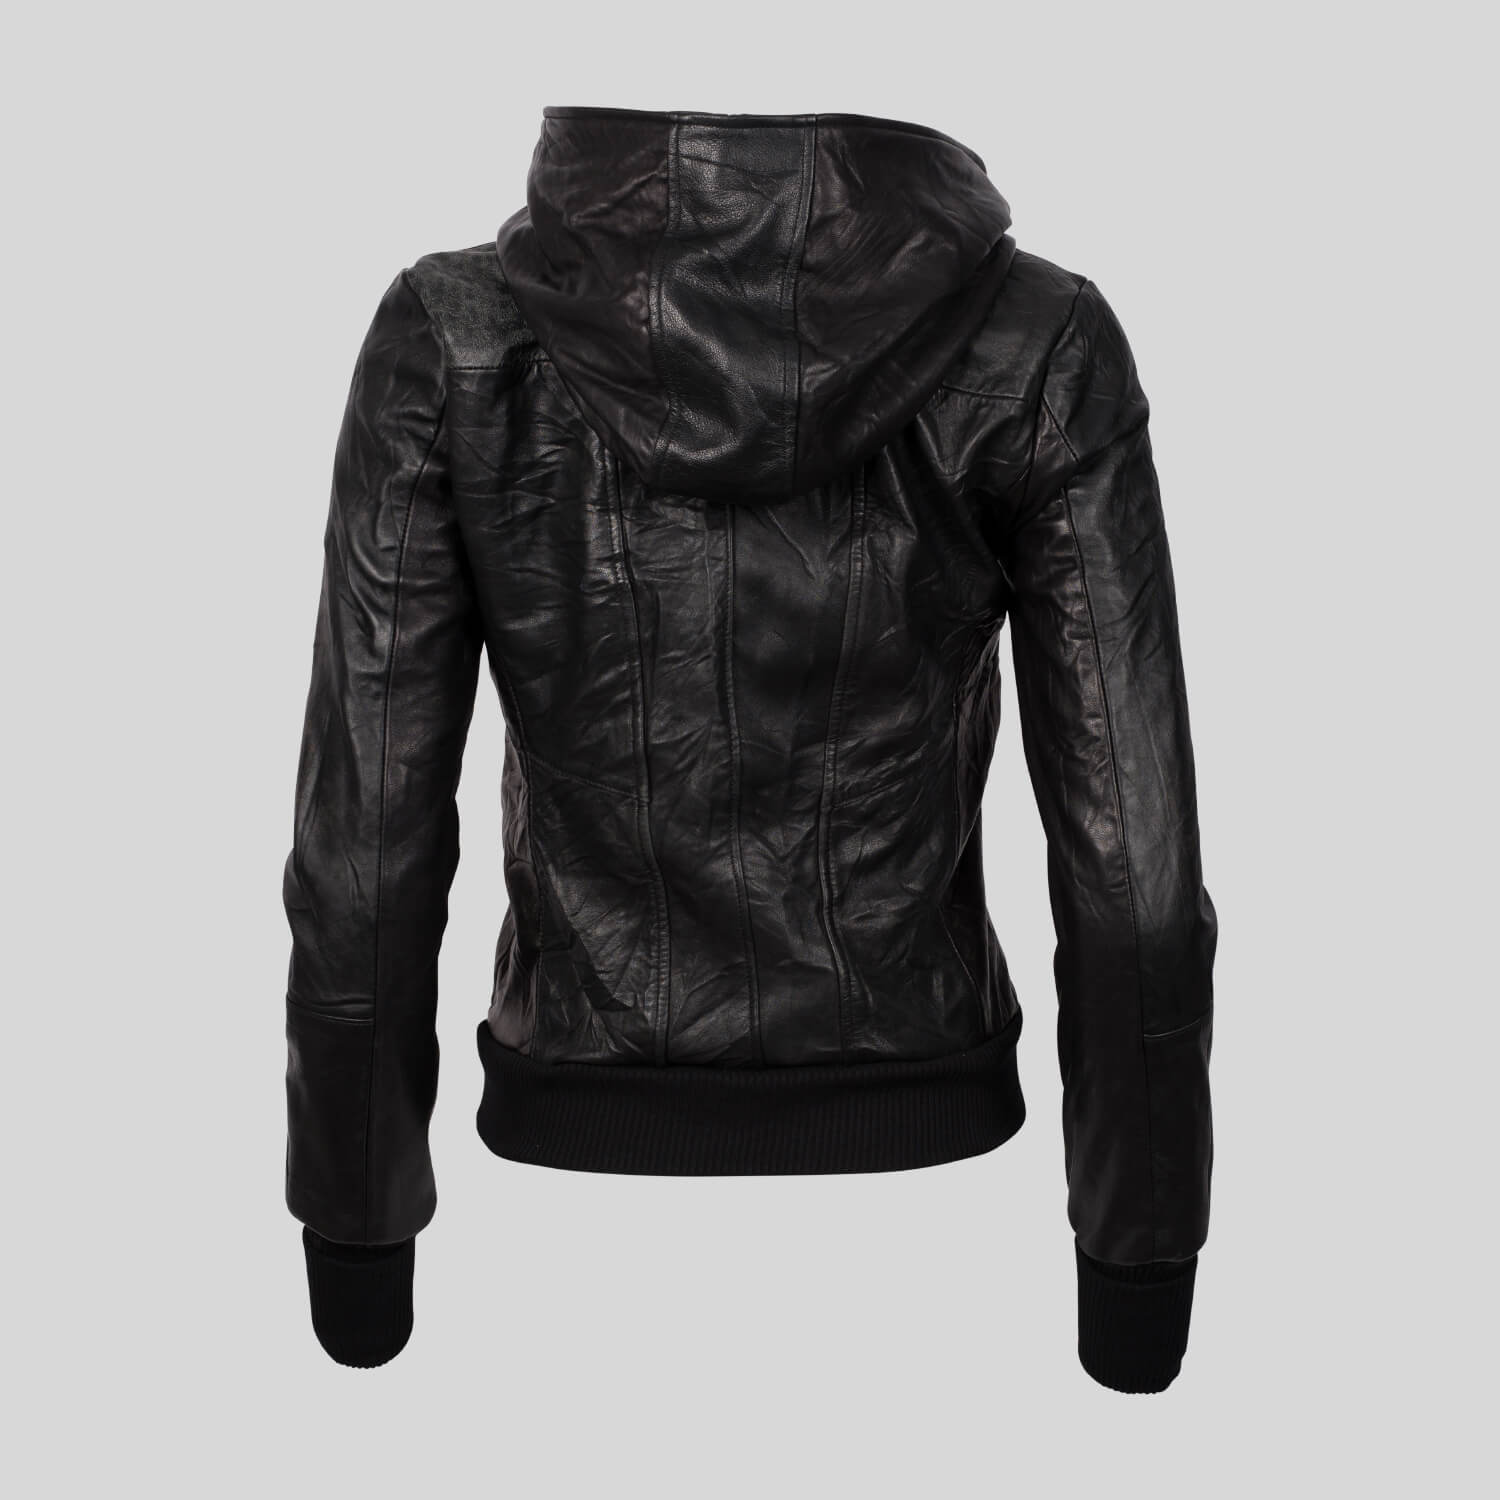 Buy Pelechecoco Macy jacket made from sustainable leather